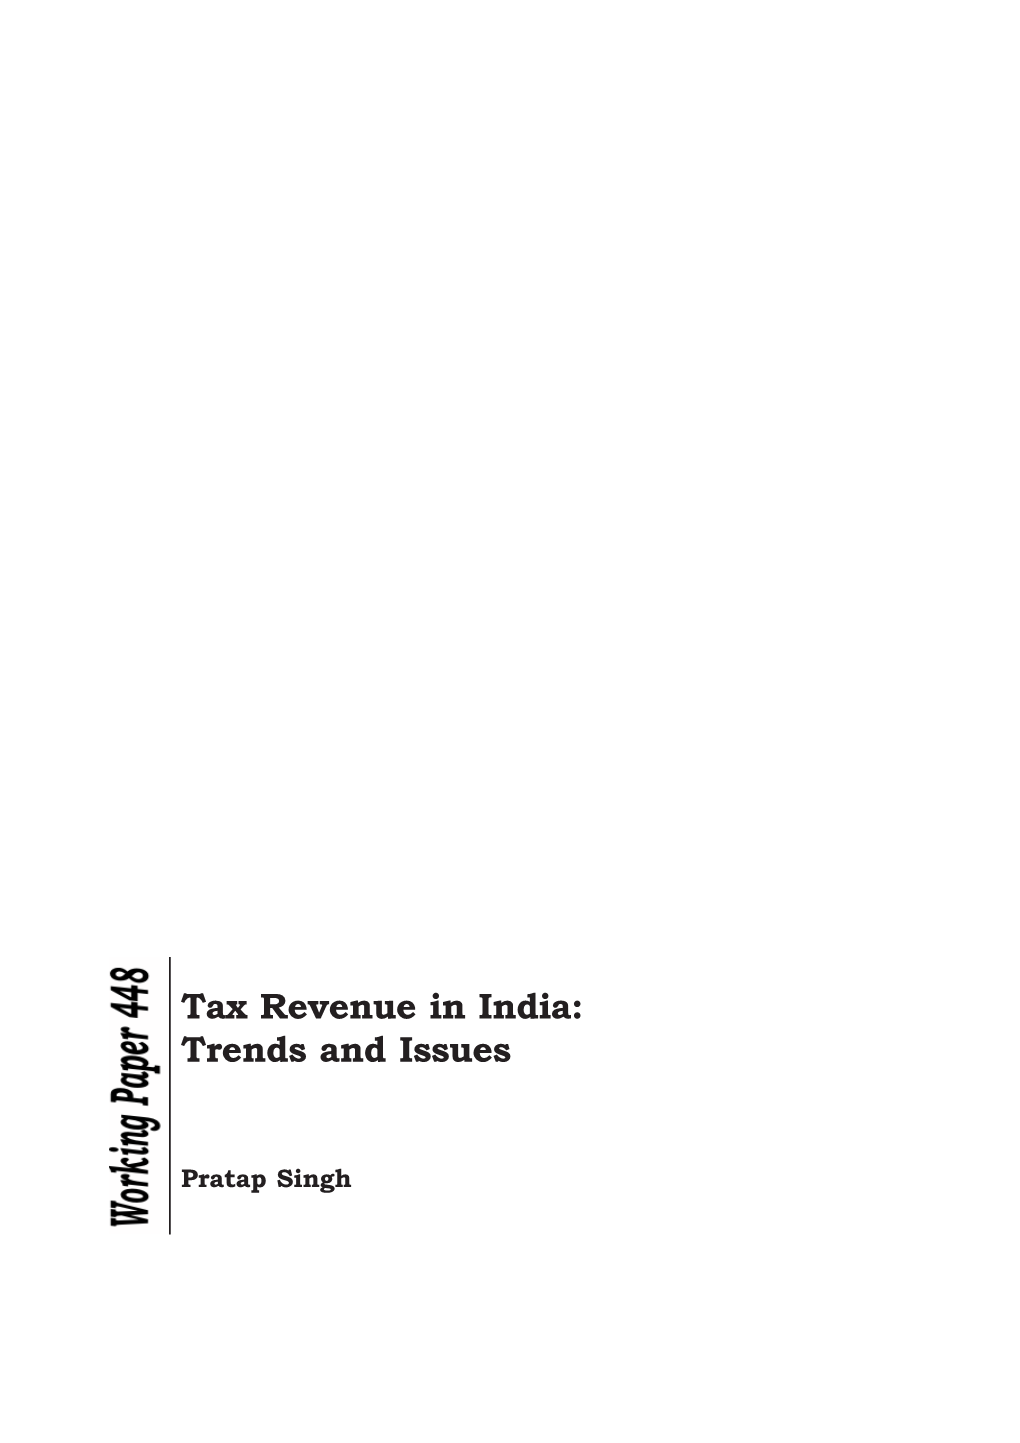 Tax Revenue in India: Trends and Issues